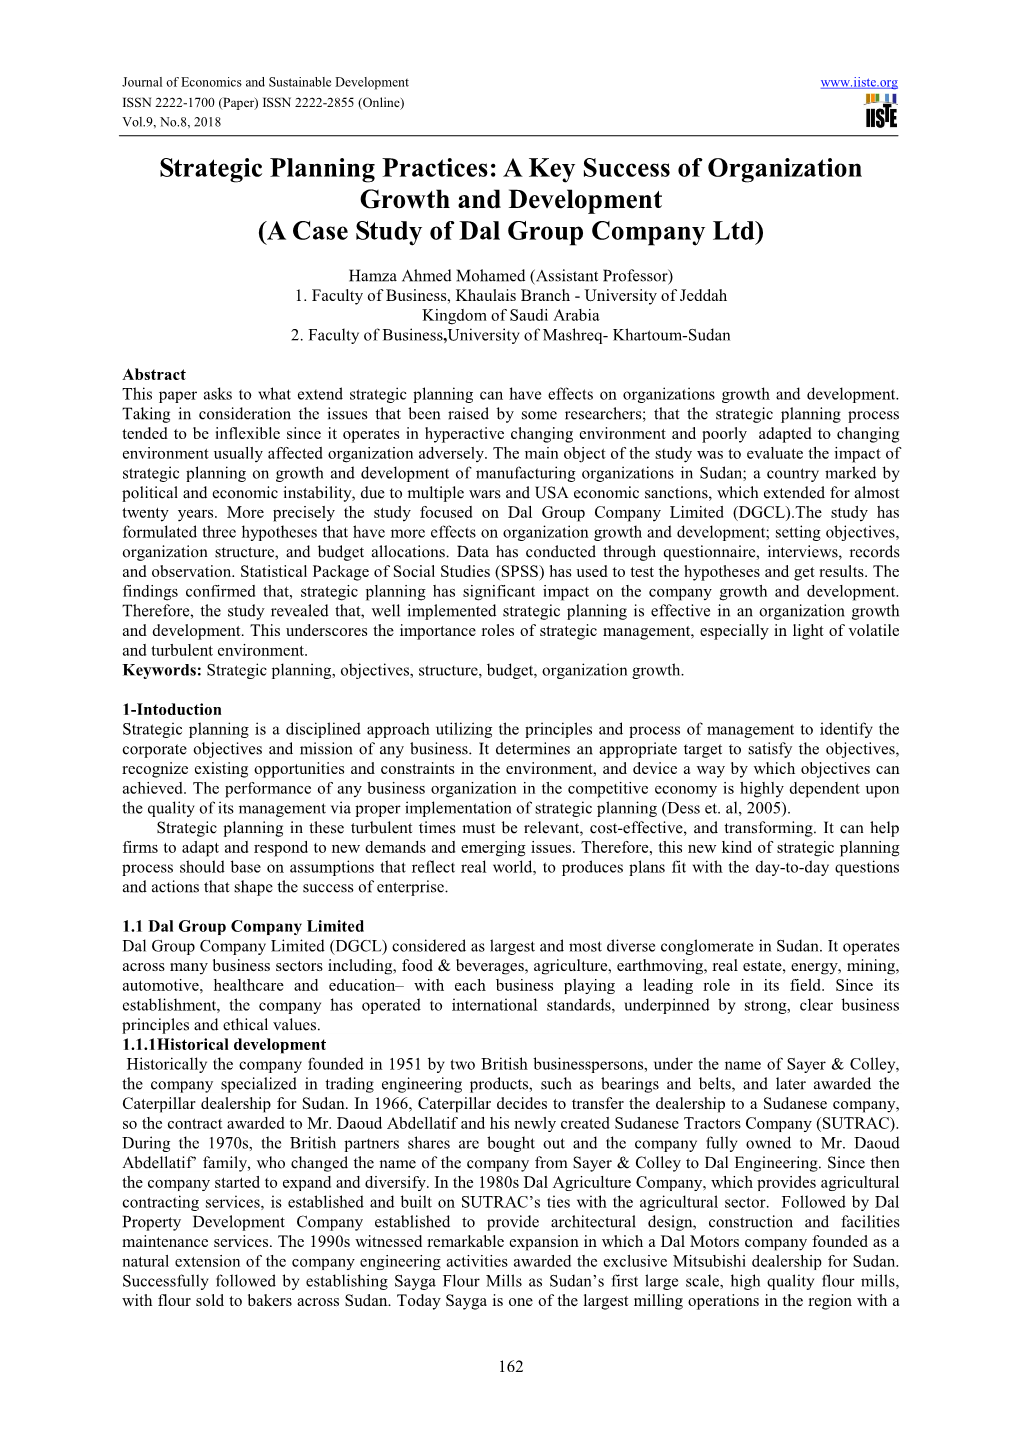 Strategic Planning Practices: a Key Success of Organization Growth and Development (A Case Study of Dal Group Company Ltd)